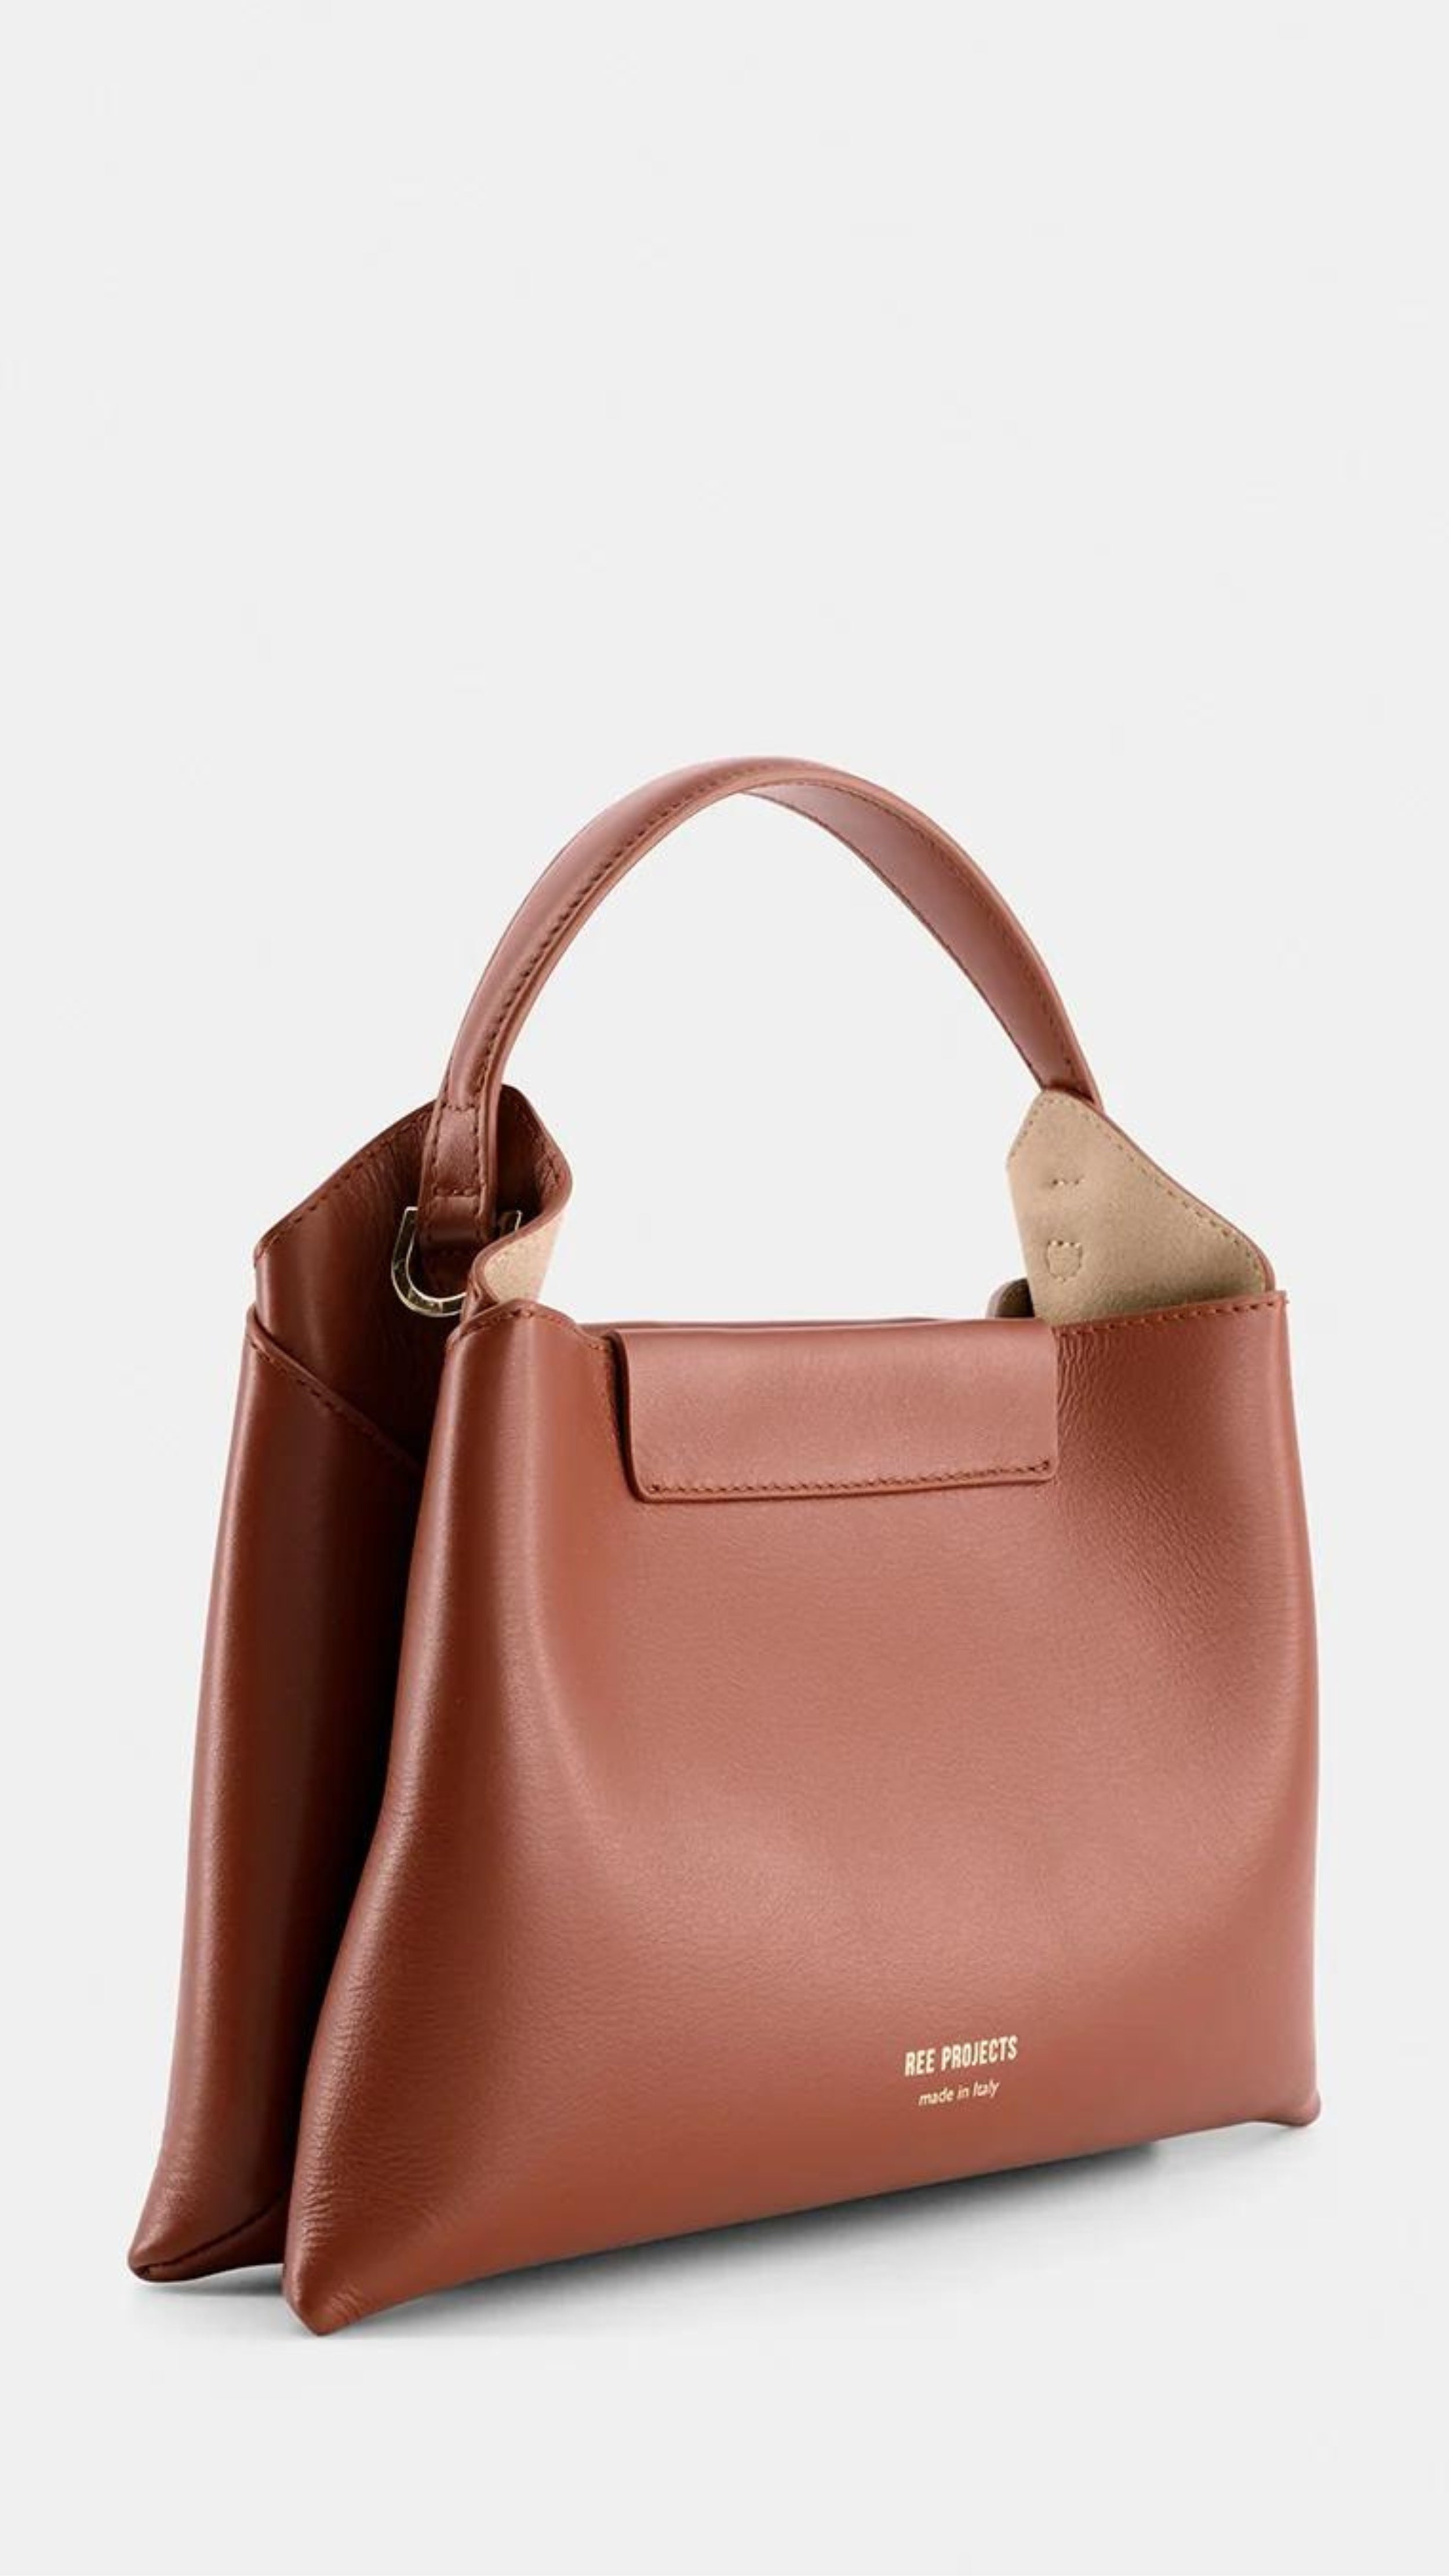 Ree Projects Elize Medium Bag in Cognac Brown. Made in italy and sustainable. Squared shape, it features a magnetic button closure and signature gussets. The purse has a spacious interior, padded top handle, and optional shoulder strap. Shown from the front side view.